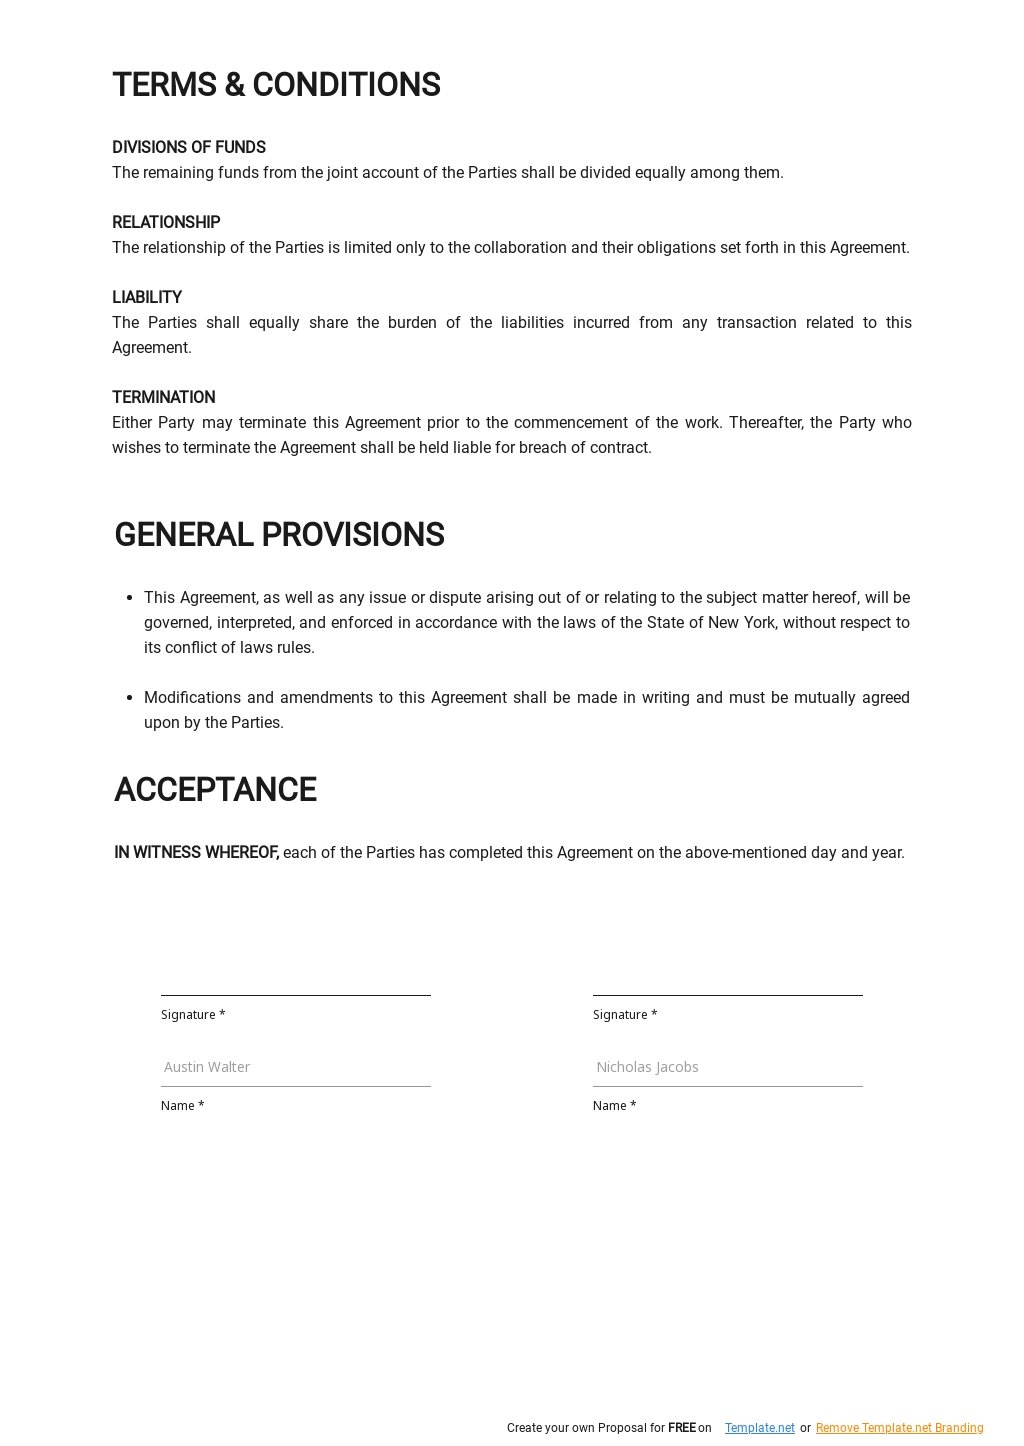 Author Collaboration Agreement Template in Template net